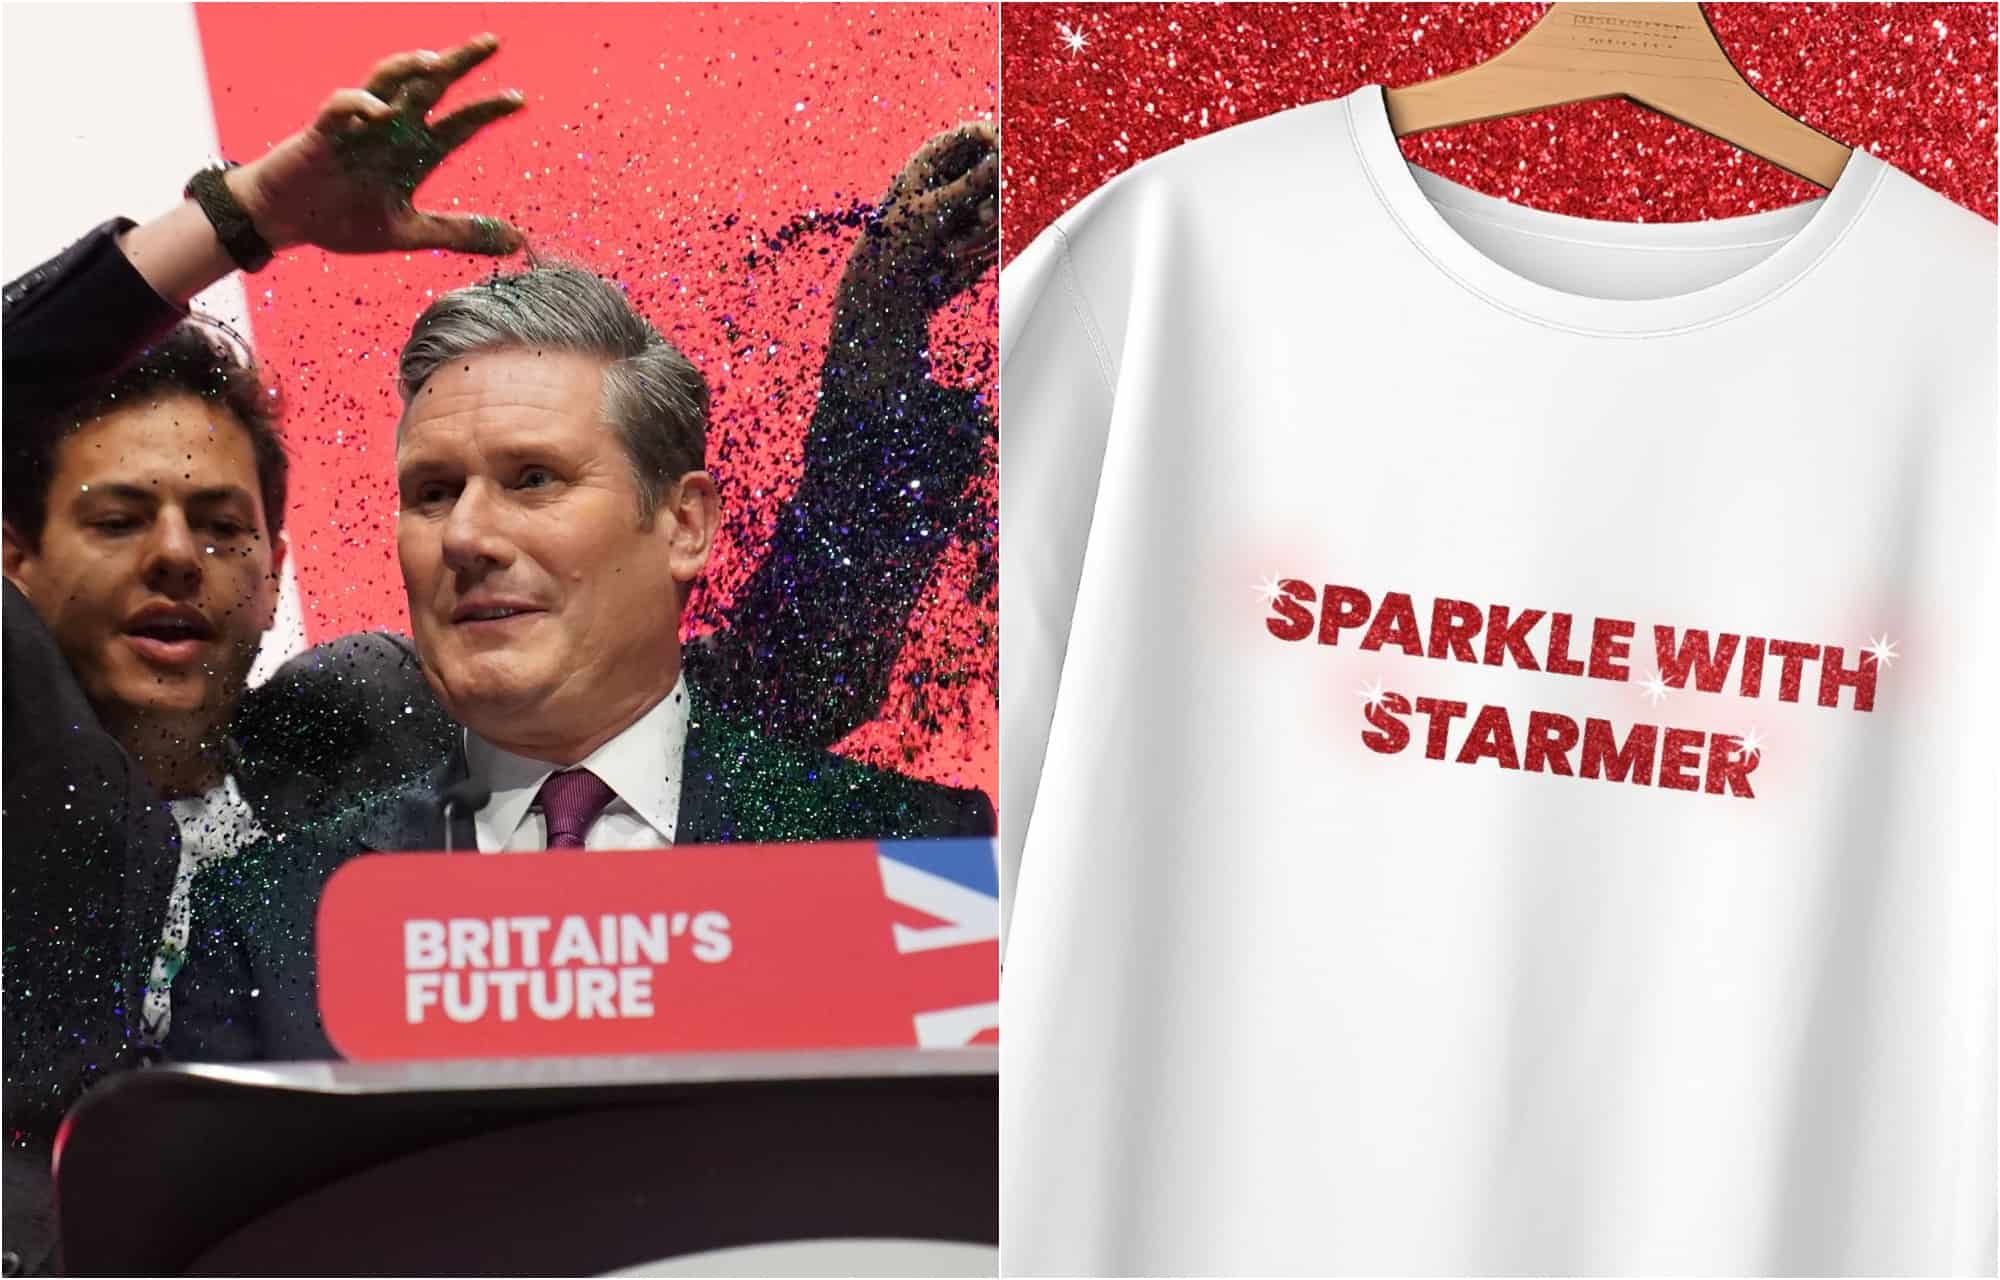 Labour release ‘Sparkle with Starmer’ T-shirt